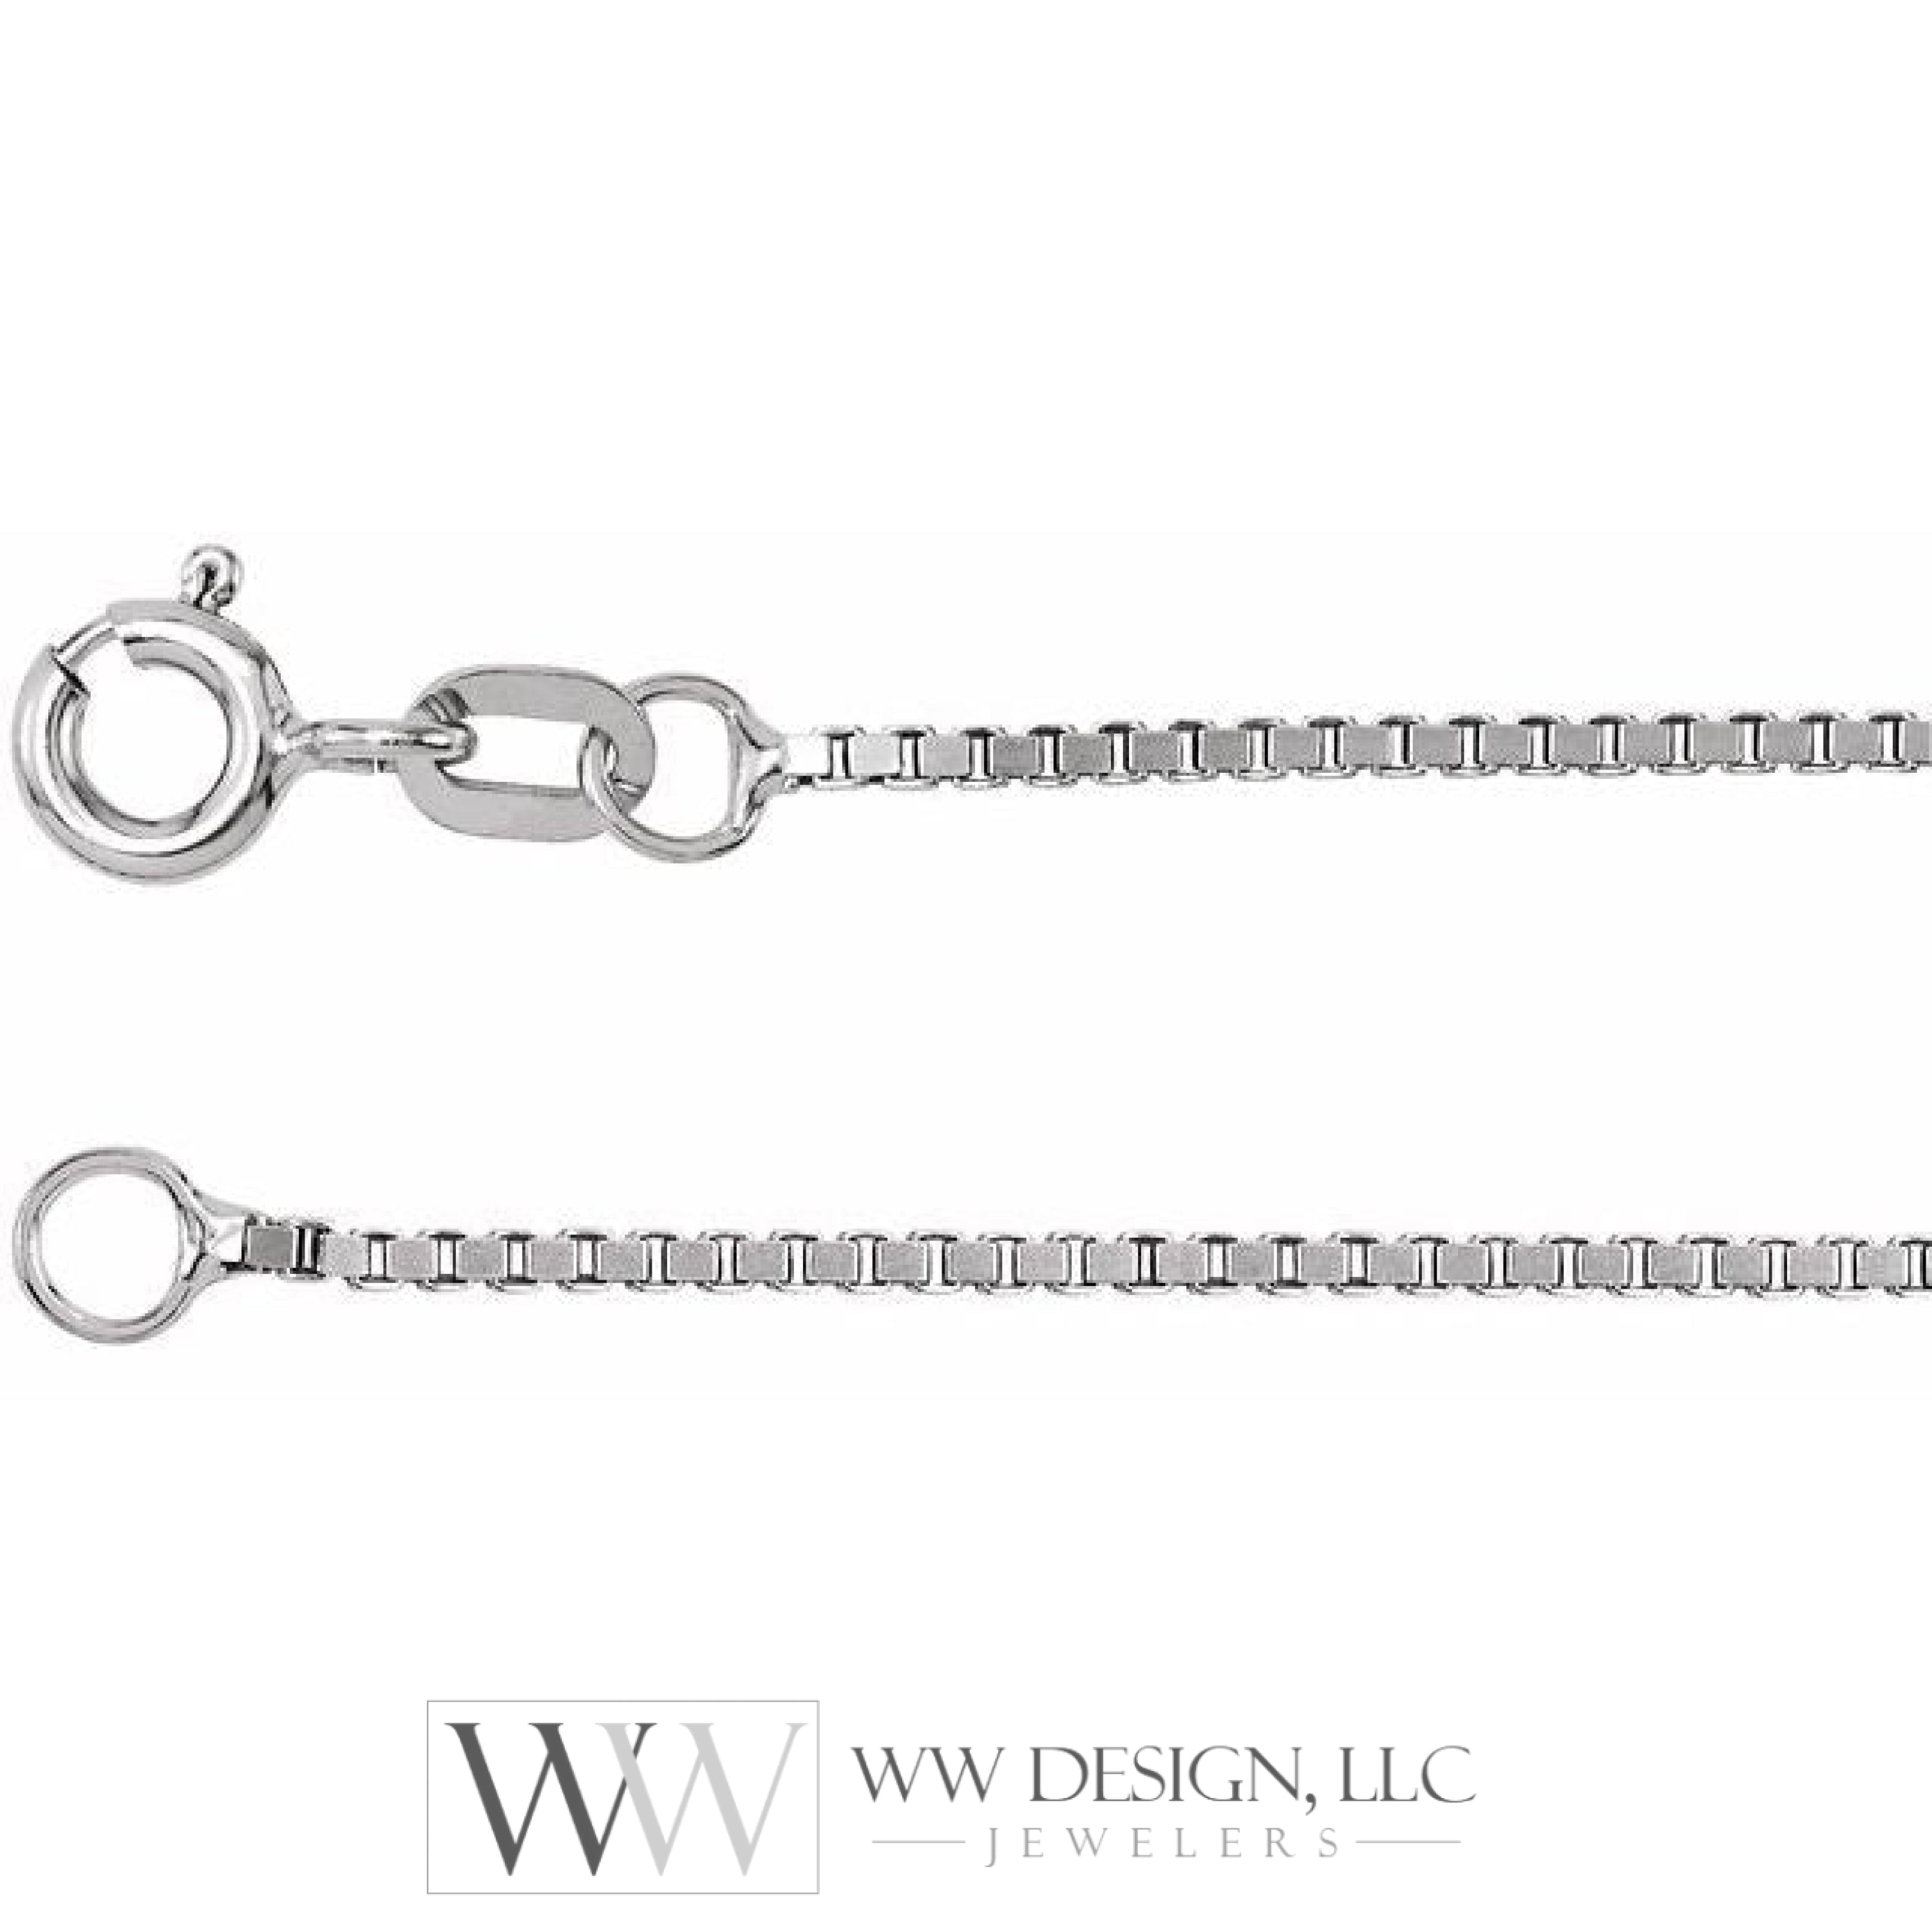 1.2mm Box Chain Bracelet or Necklace - 14k Gold (Y, W), or Sterling Silver